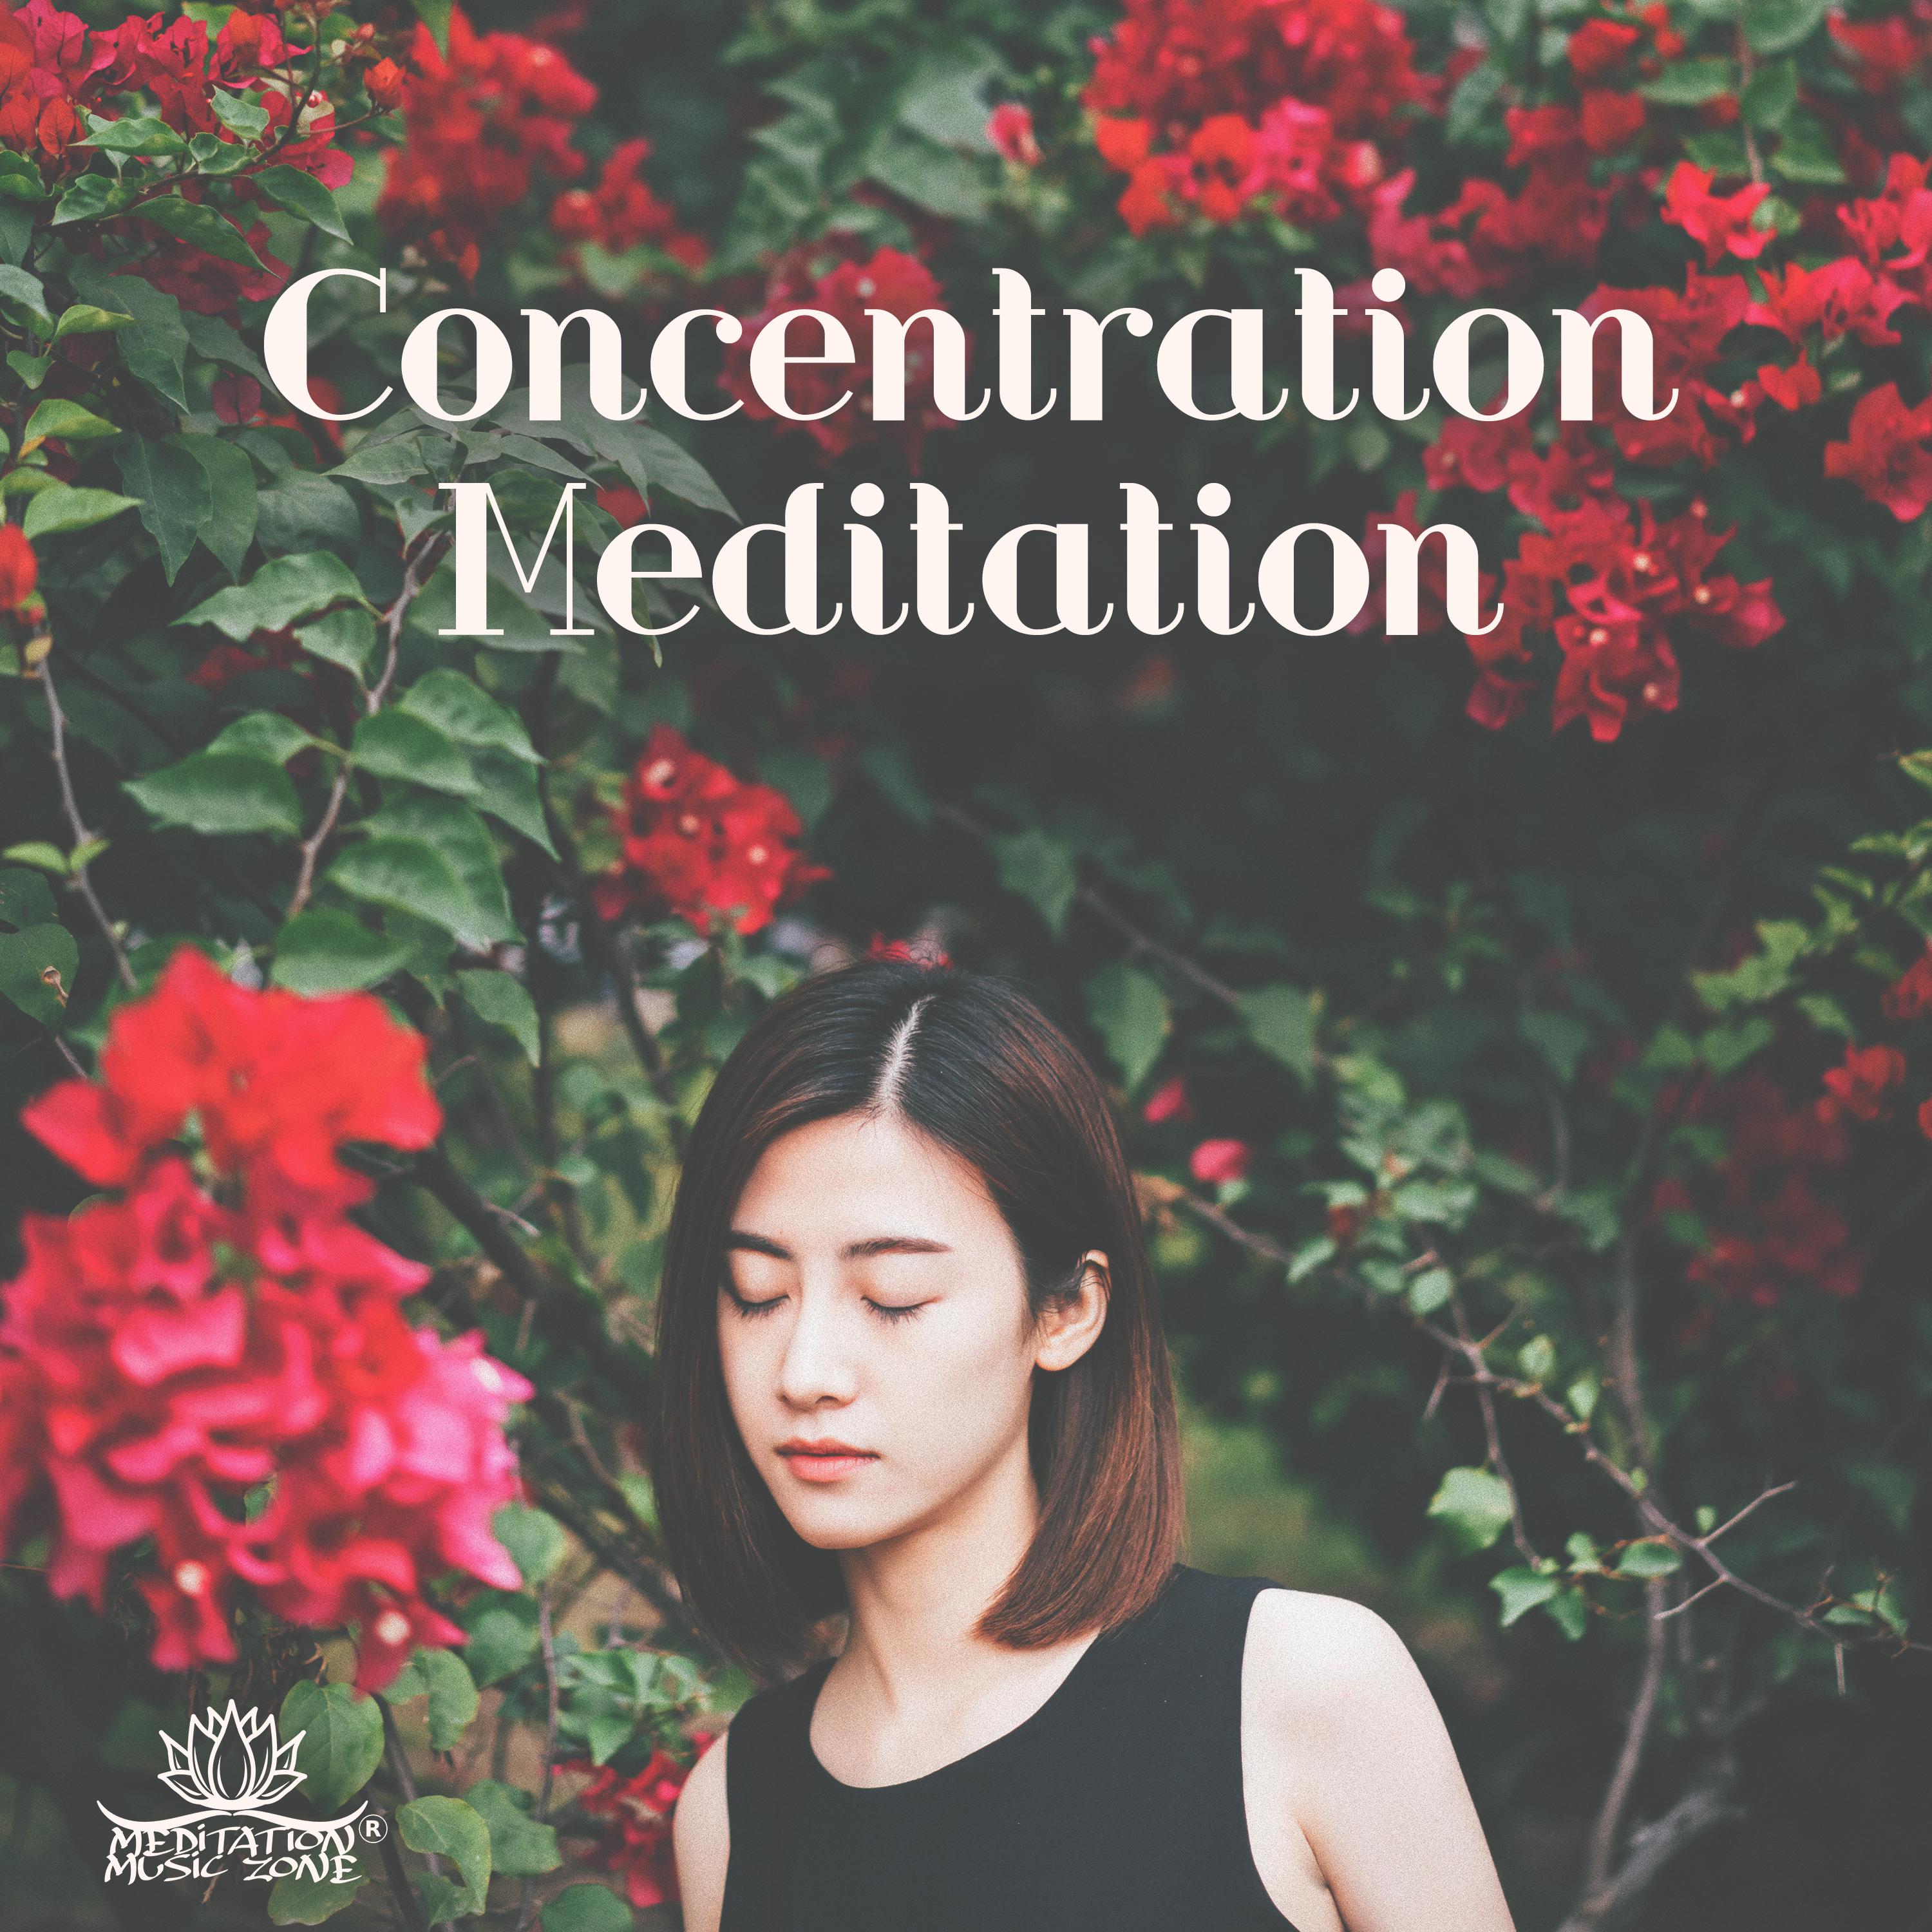 Concentration Meditation (New Age Tips for Mindfulness & Deep Relaxation, Calm Down)